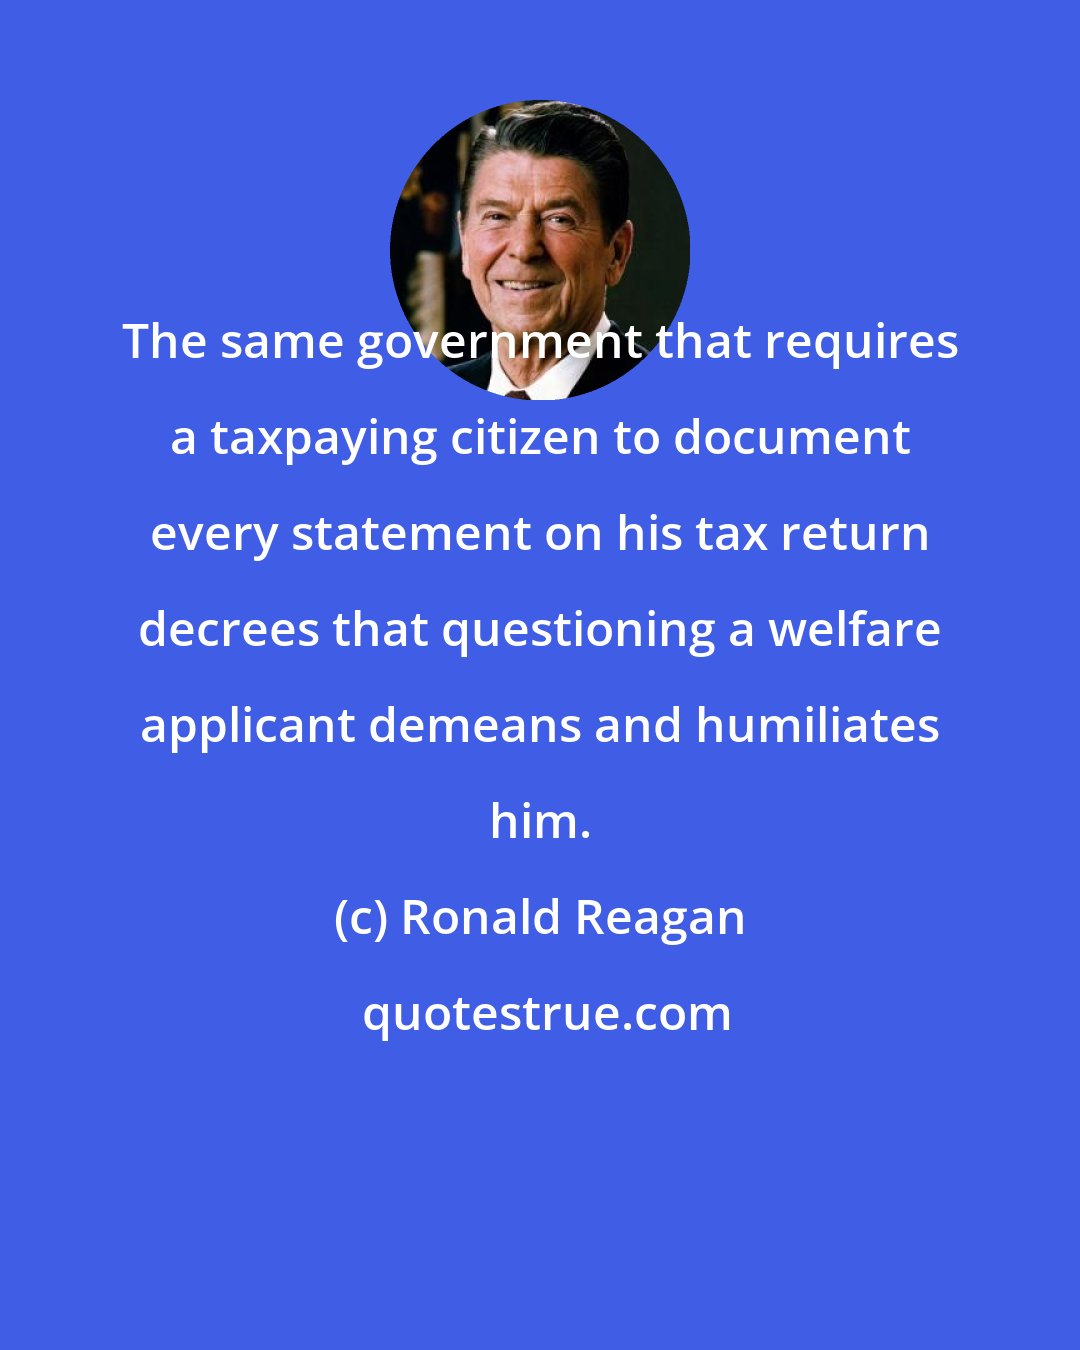 Ronald Reagan: The same government that requires a taxpaying citizen to document every statement on his tax return decrees that questioning a welfare applicant demeans and humiliates him.